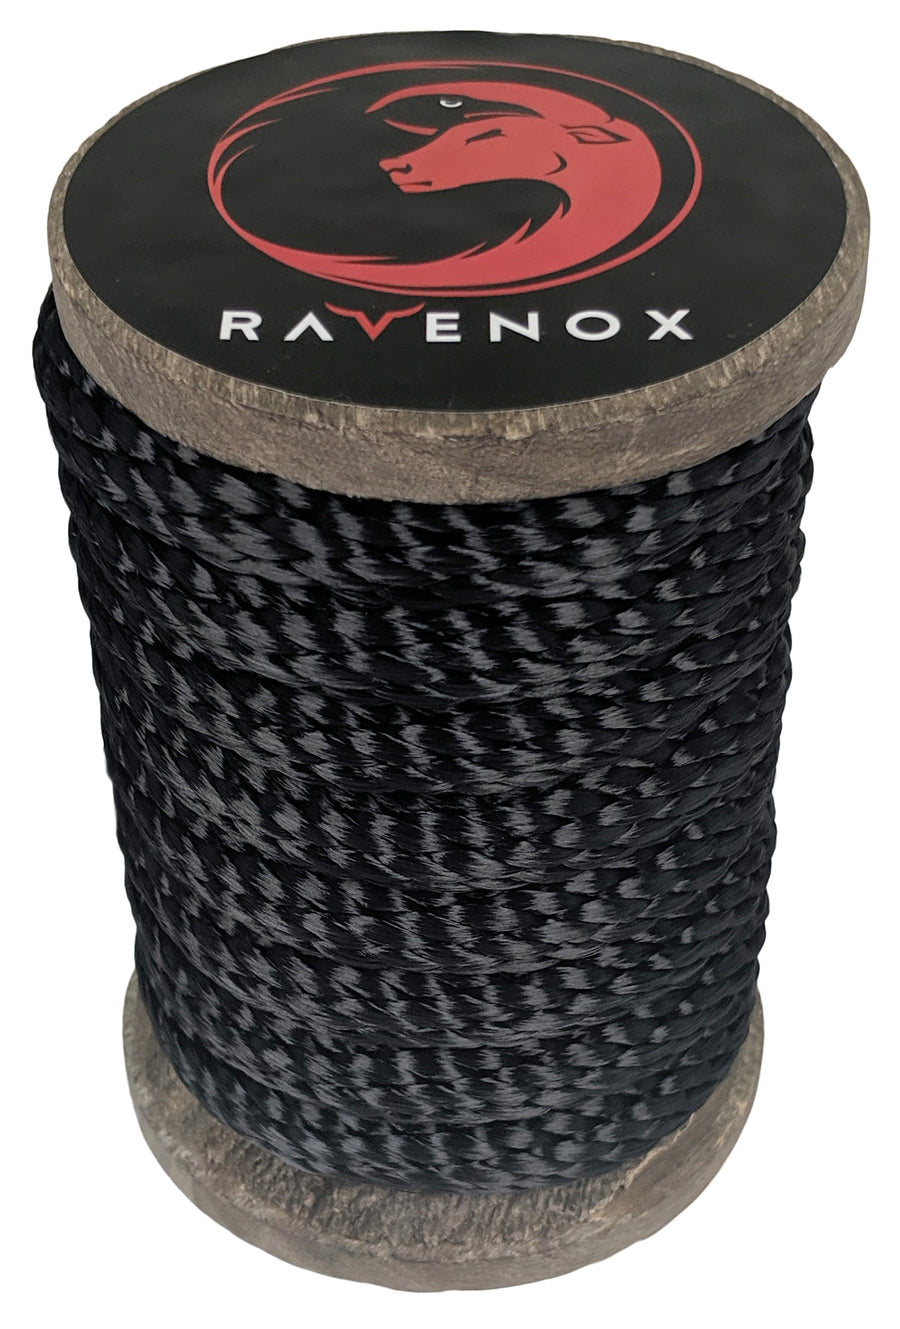 Black Solid Braid Polyester Rope by Ravenox, ideal for outdoor and marine use. (4578876915802)